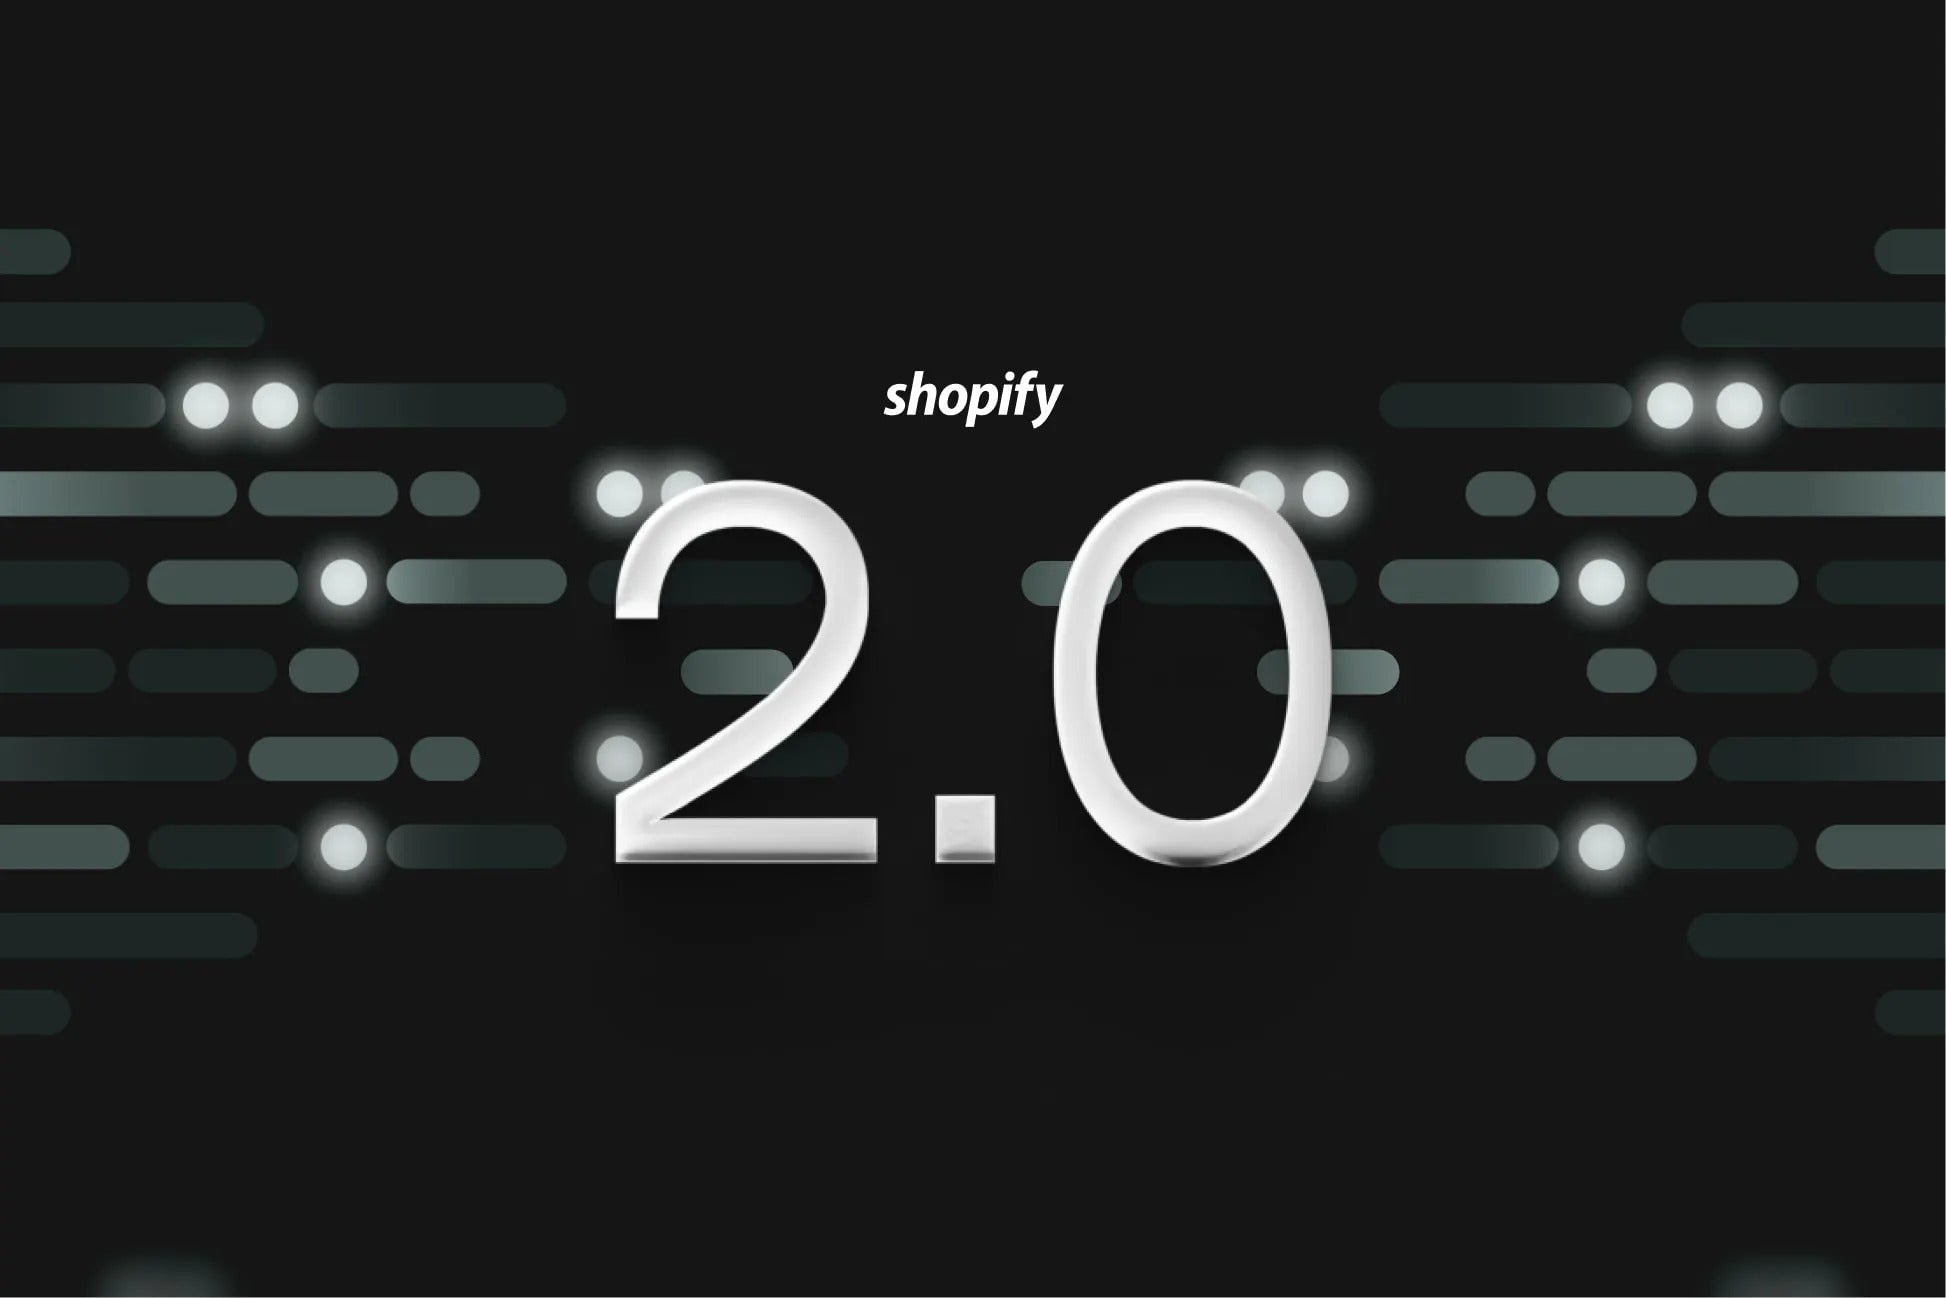 What's new on Shopify 2.0